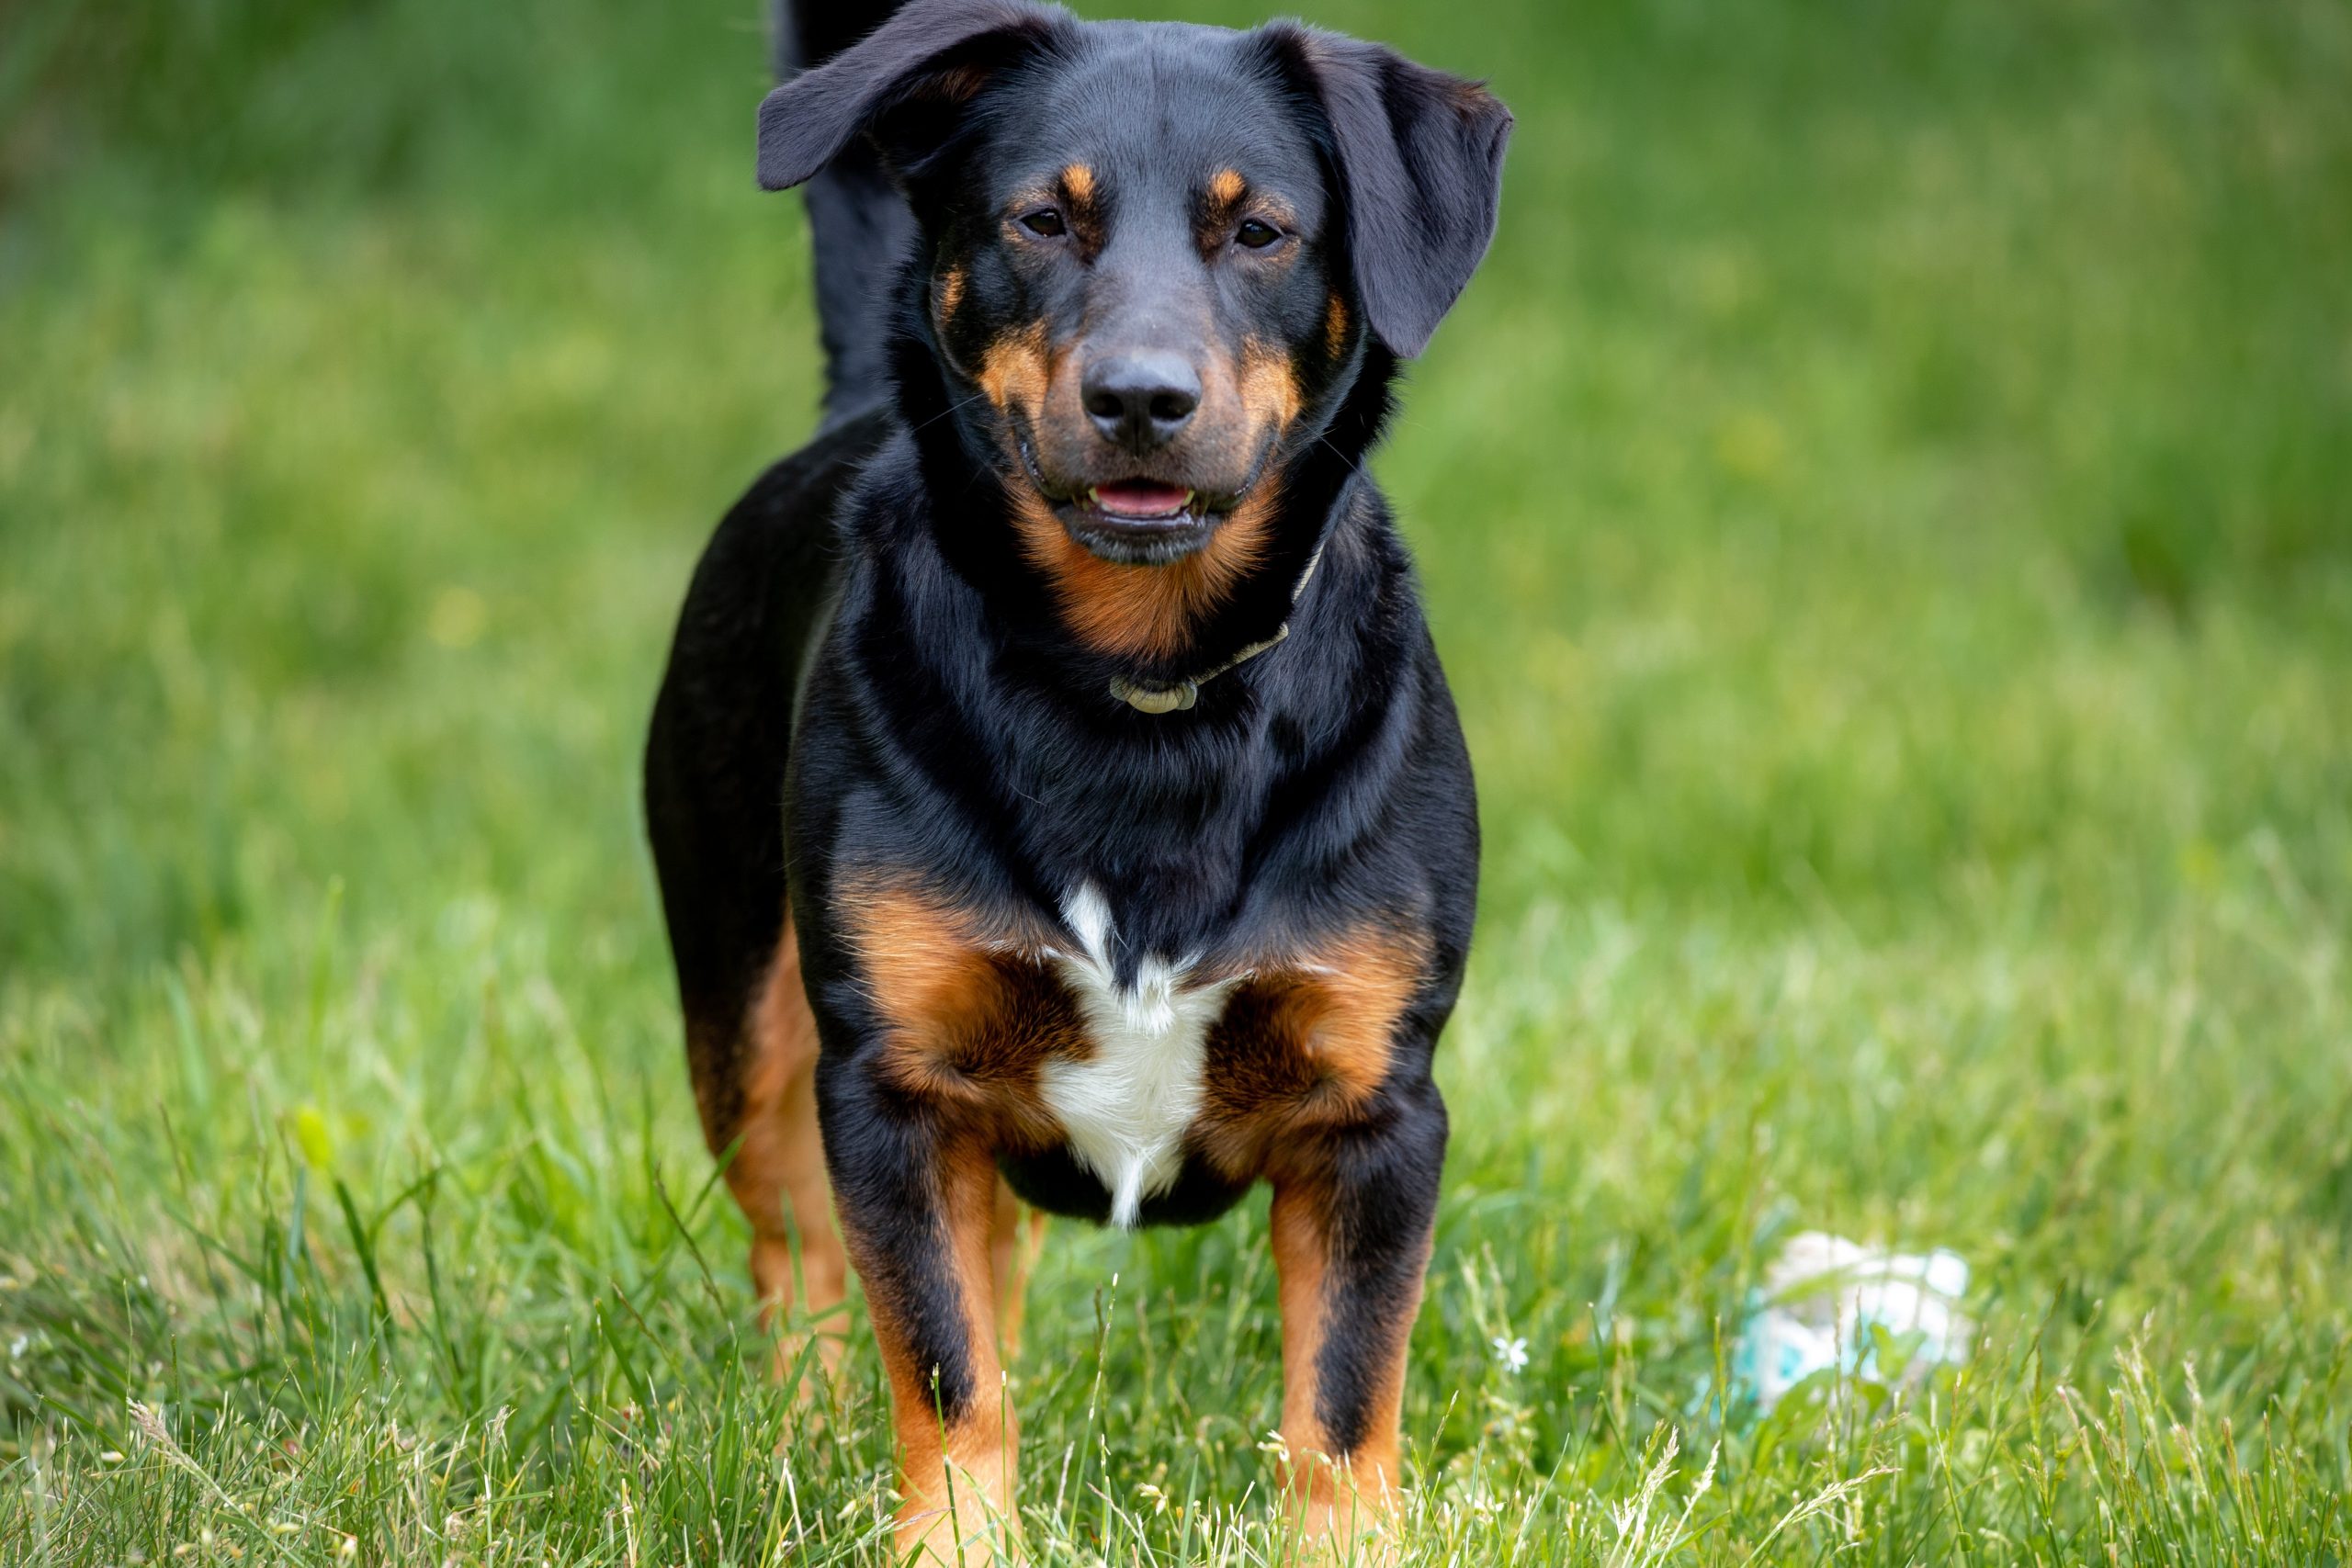 How Often Do You Need To Groom a Rottweiler?